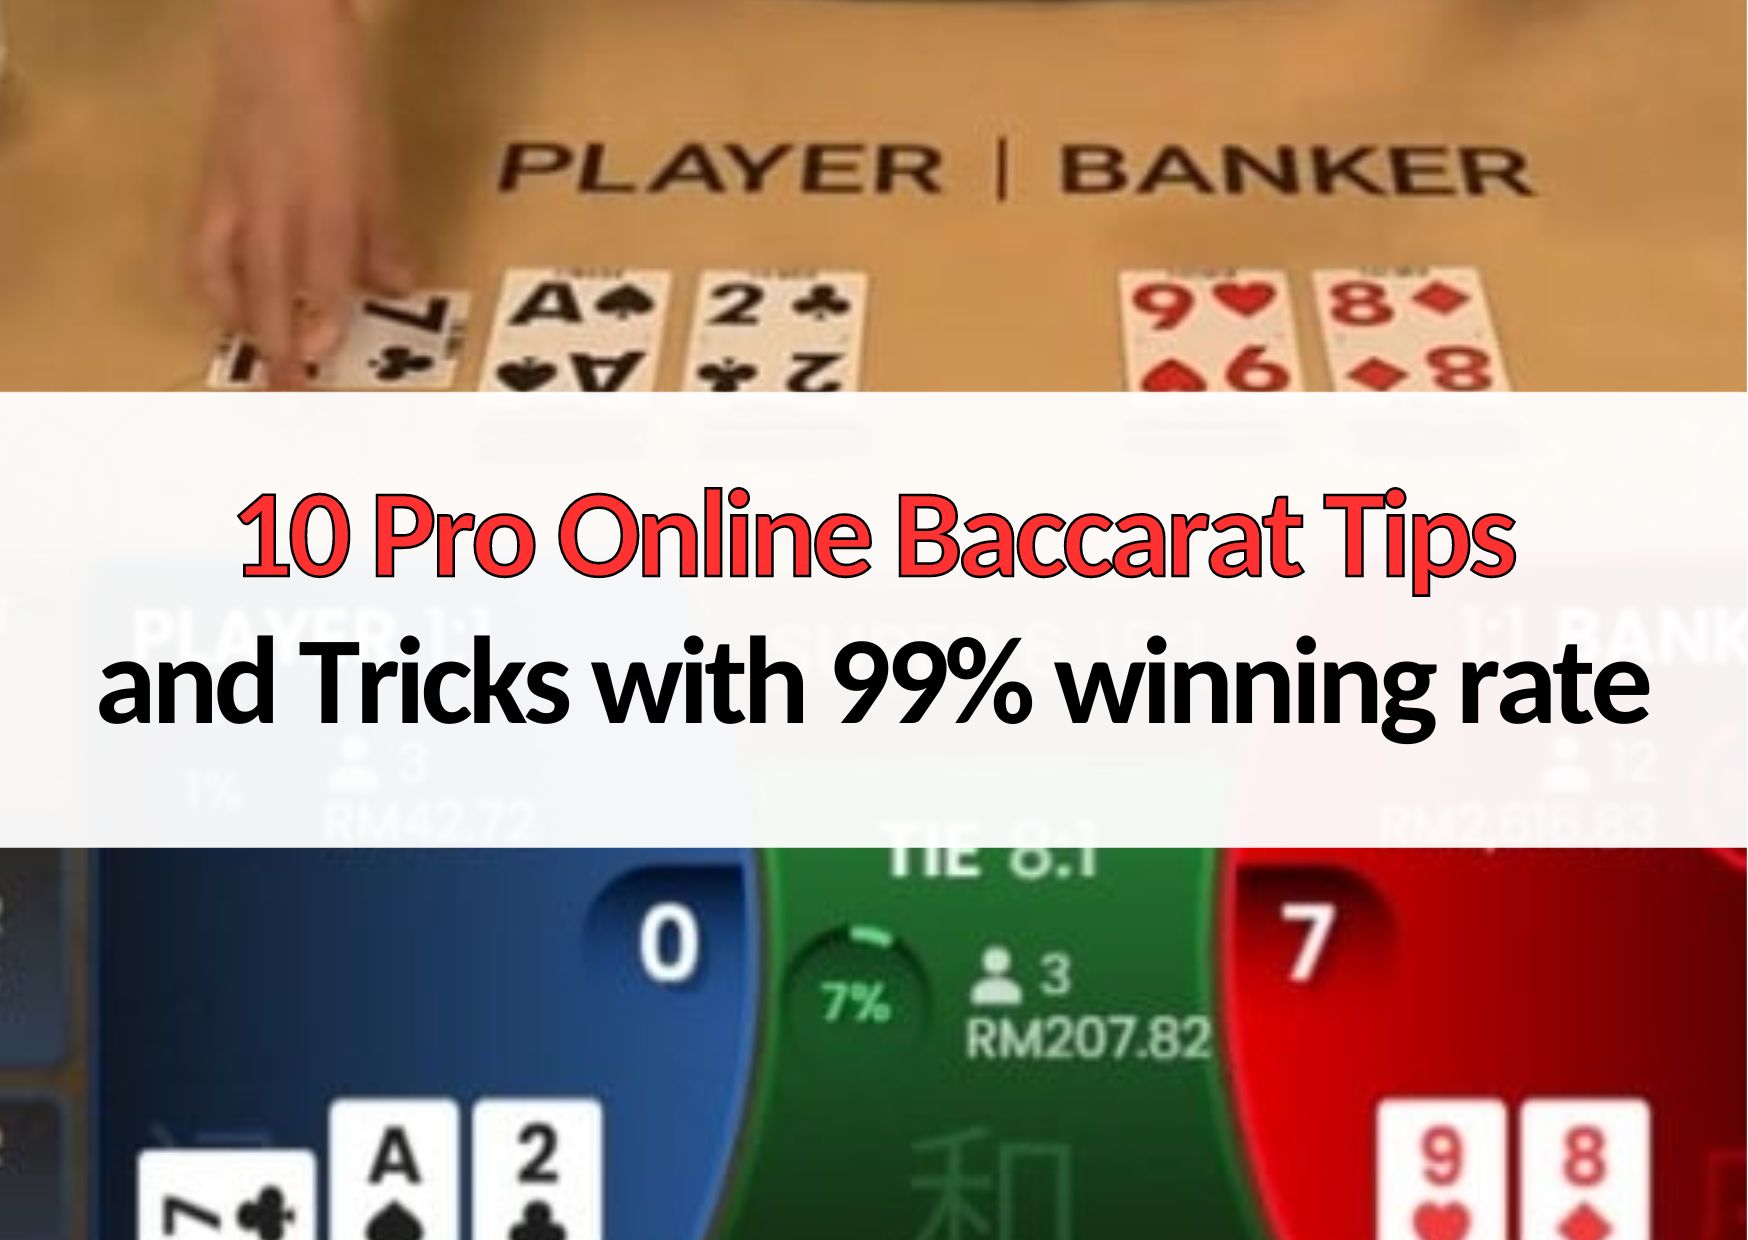 10 Pro Online Baccarat Tips and Tricks with 99% winning rate